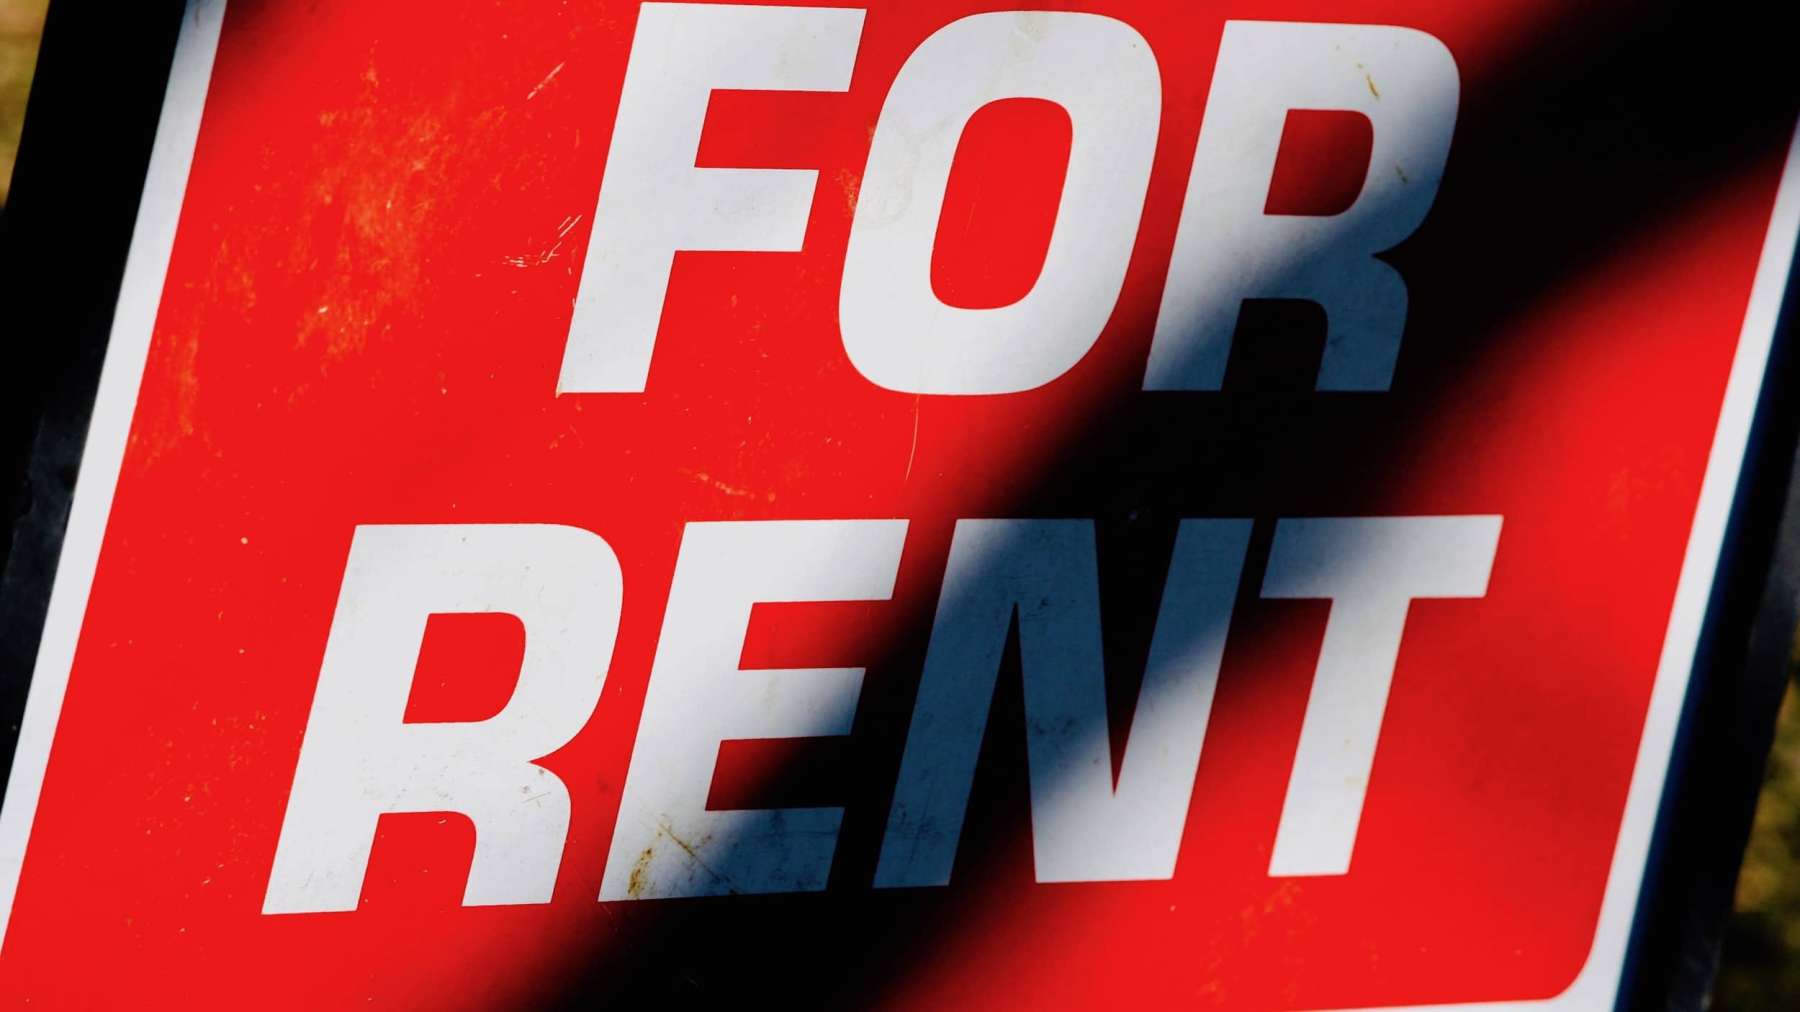 Rhode Island News: Rhode Island’s slow and nonexistent action on rental and housing assistance is cruel